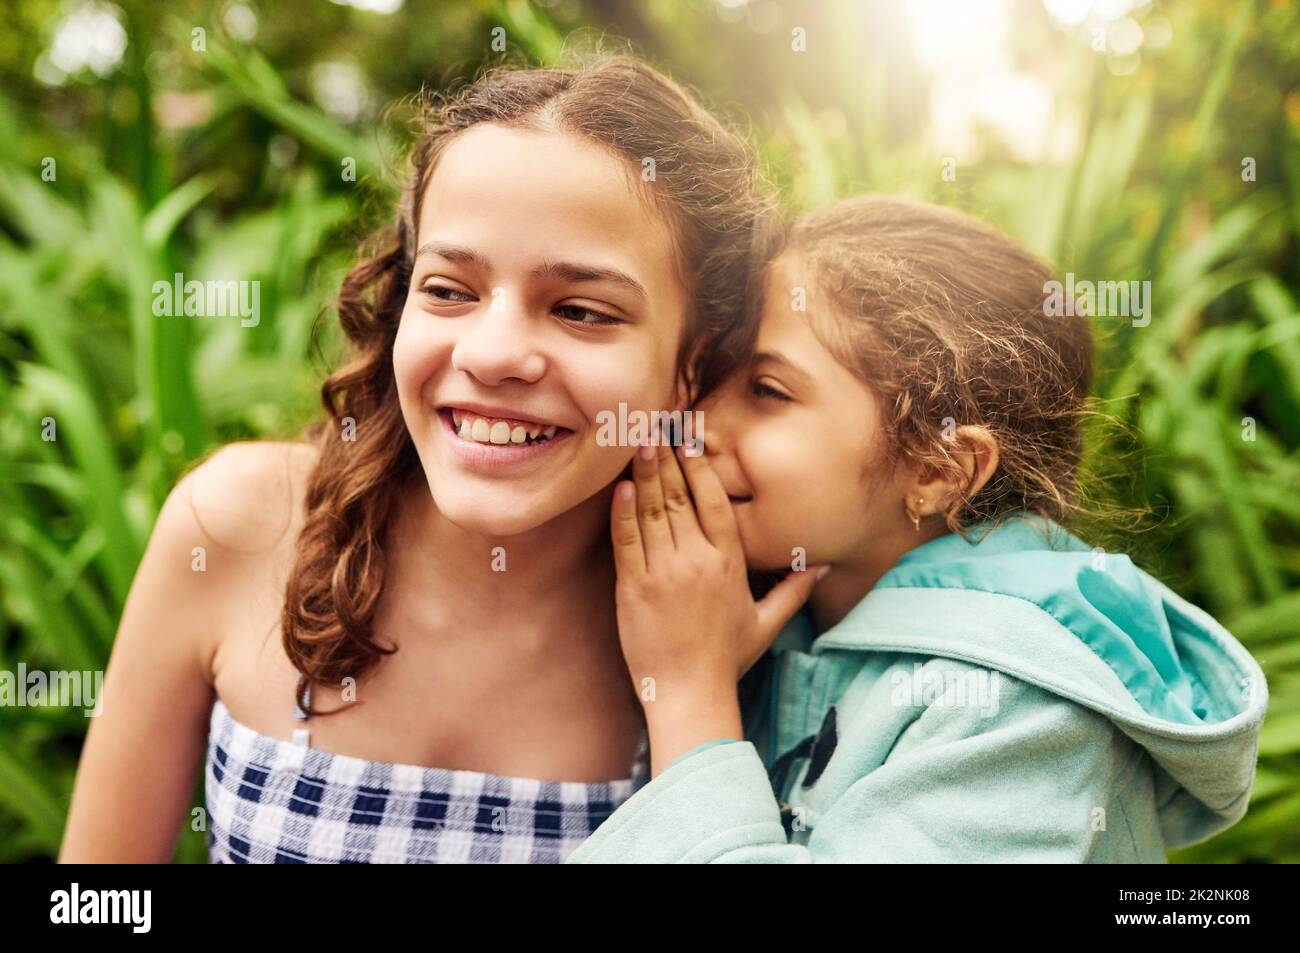 Ive got a secret to tell you. Cropped shot of an adorable little girl whispering into her sisters ear while out in the park. Stock Photo